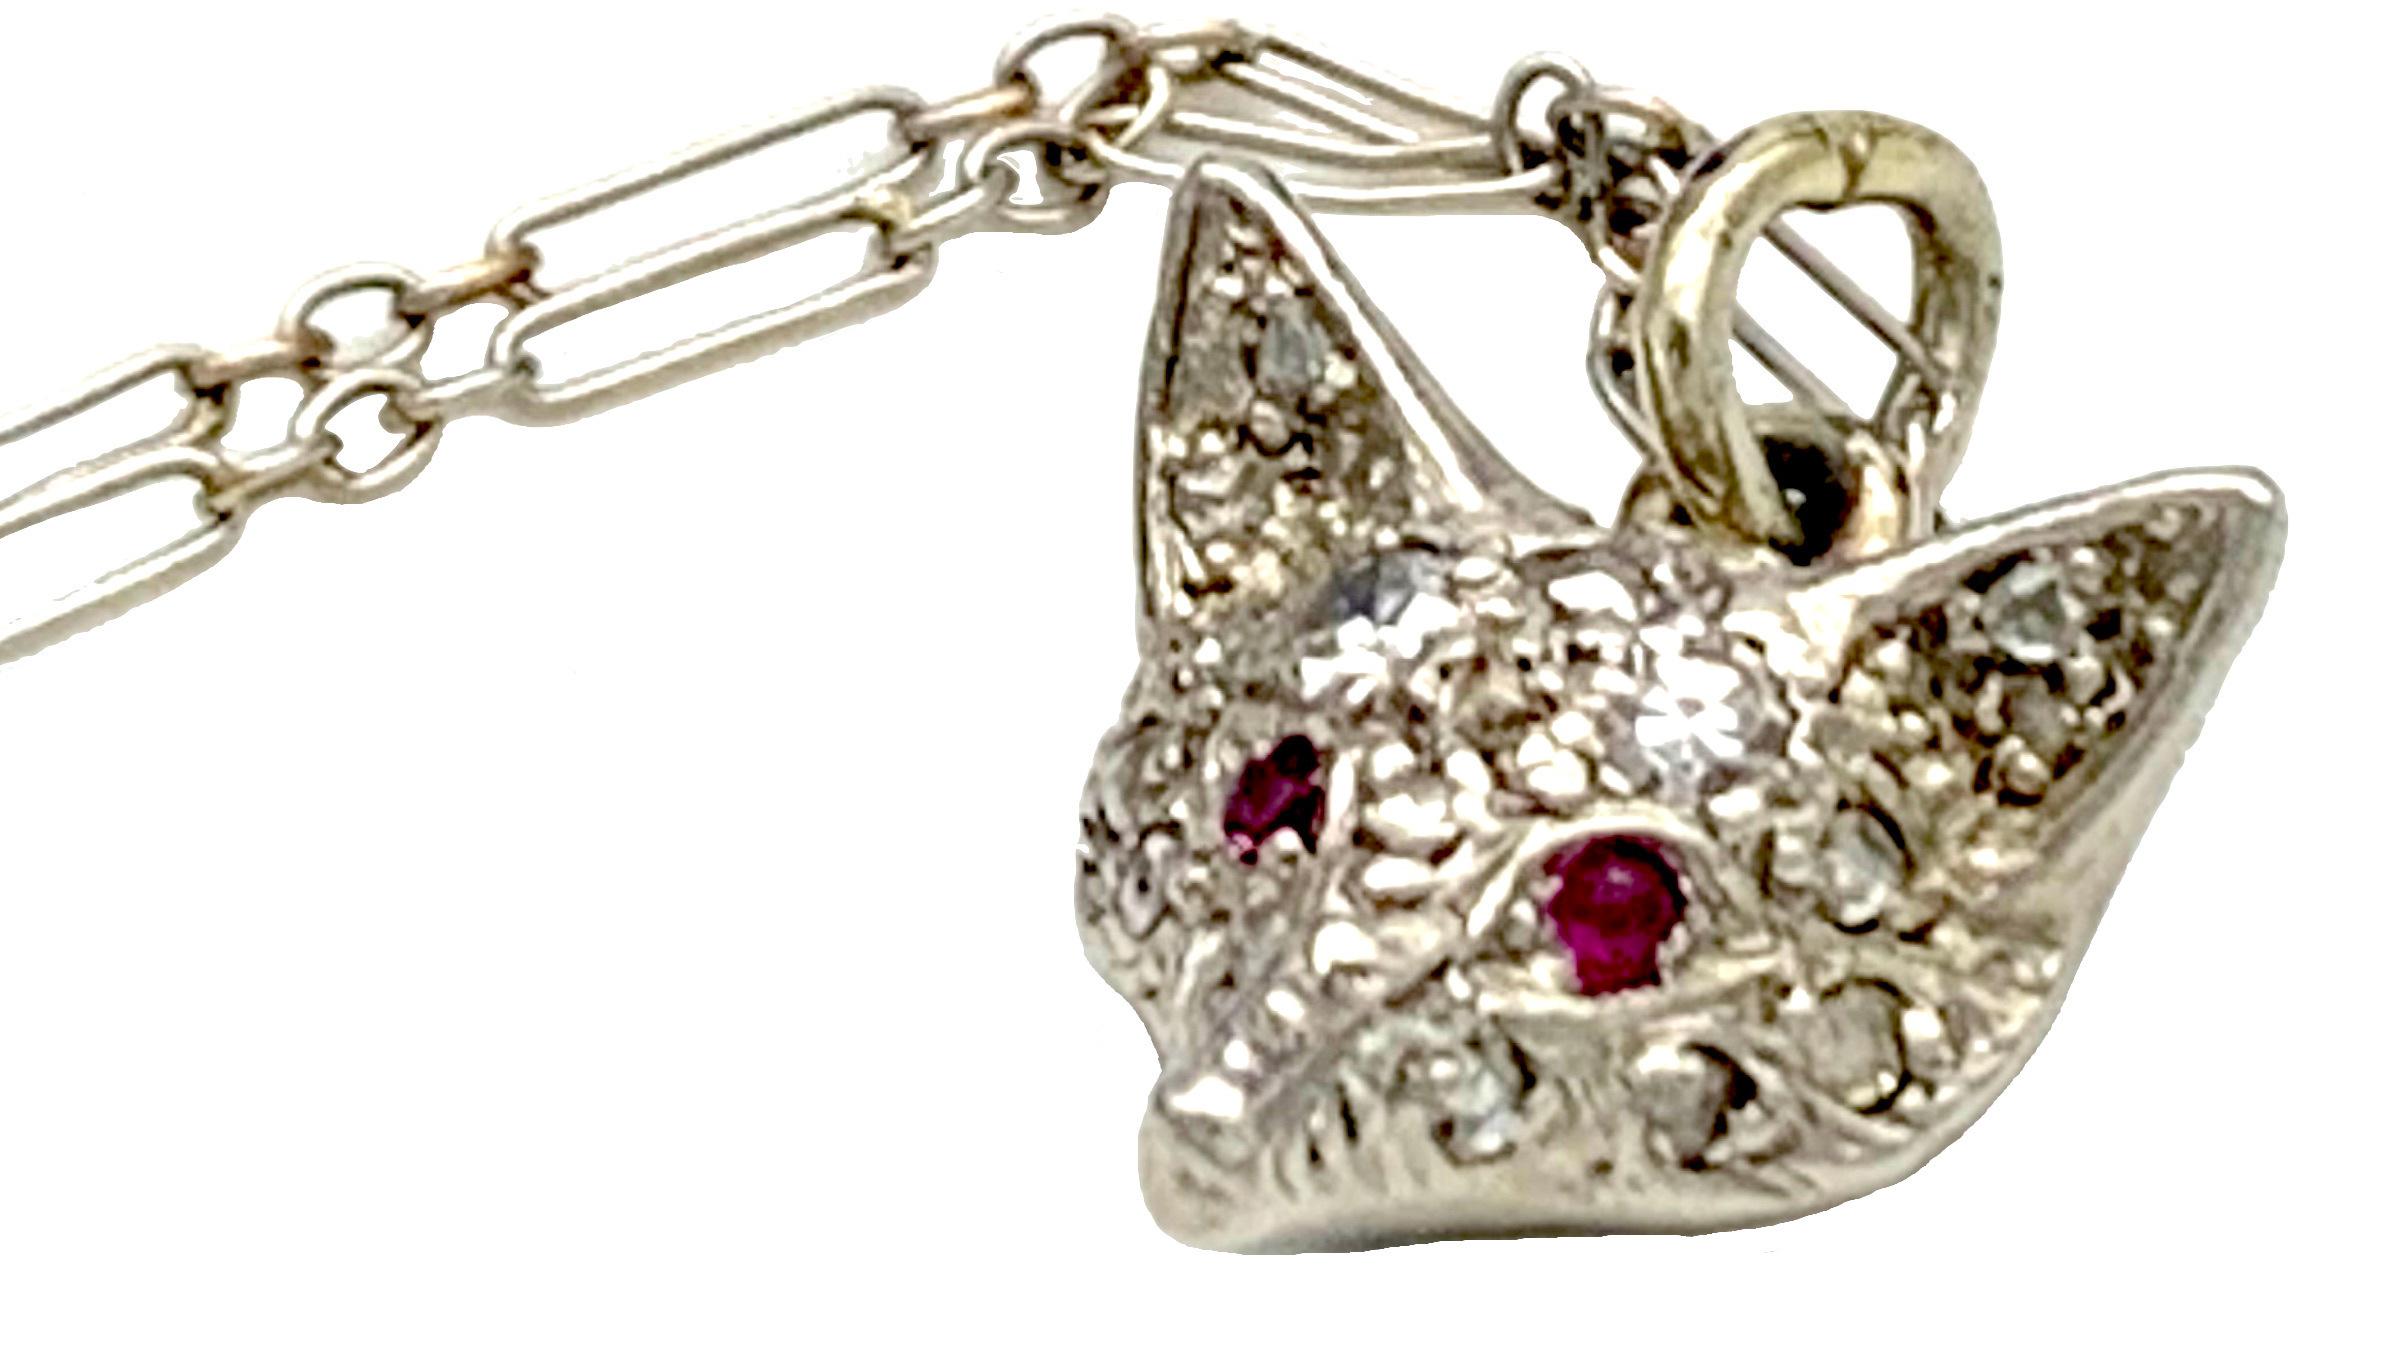 This delicate platinum pendant necklace was created around 1910. The head of the little fox is set with rose cut diamonds. The foxes eyes are made out of round cut rubies. The platinum necklace closes with an 18K yellow gold bolt ring.
The length of